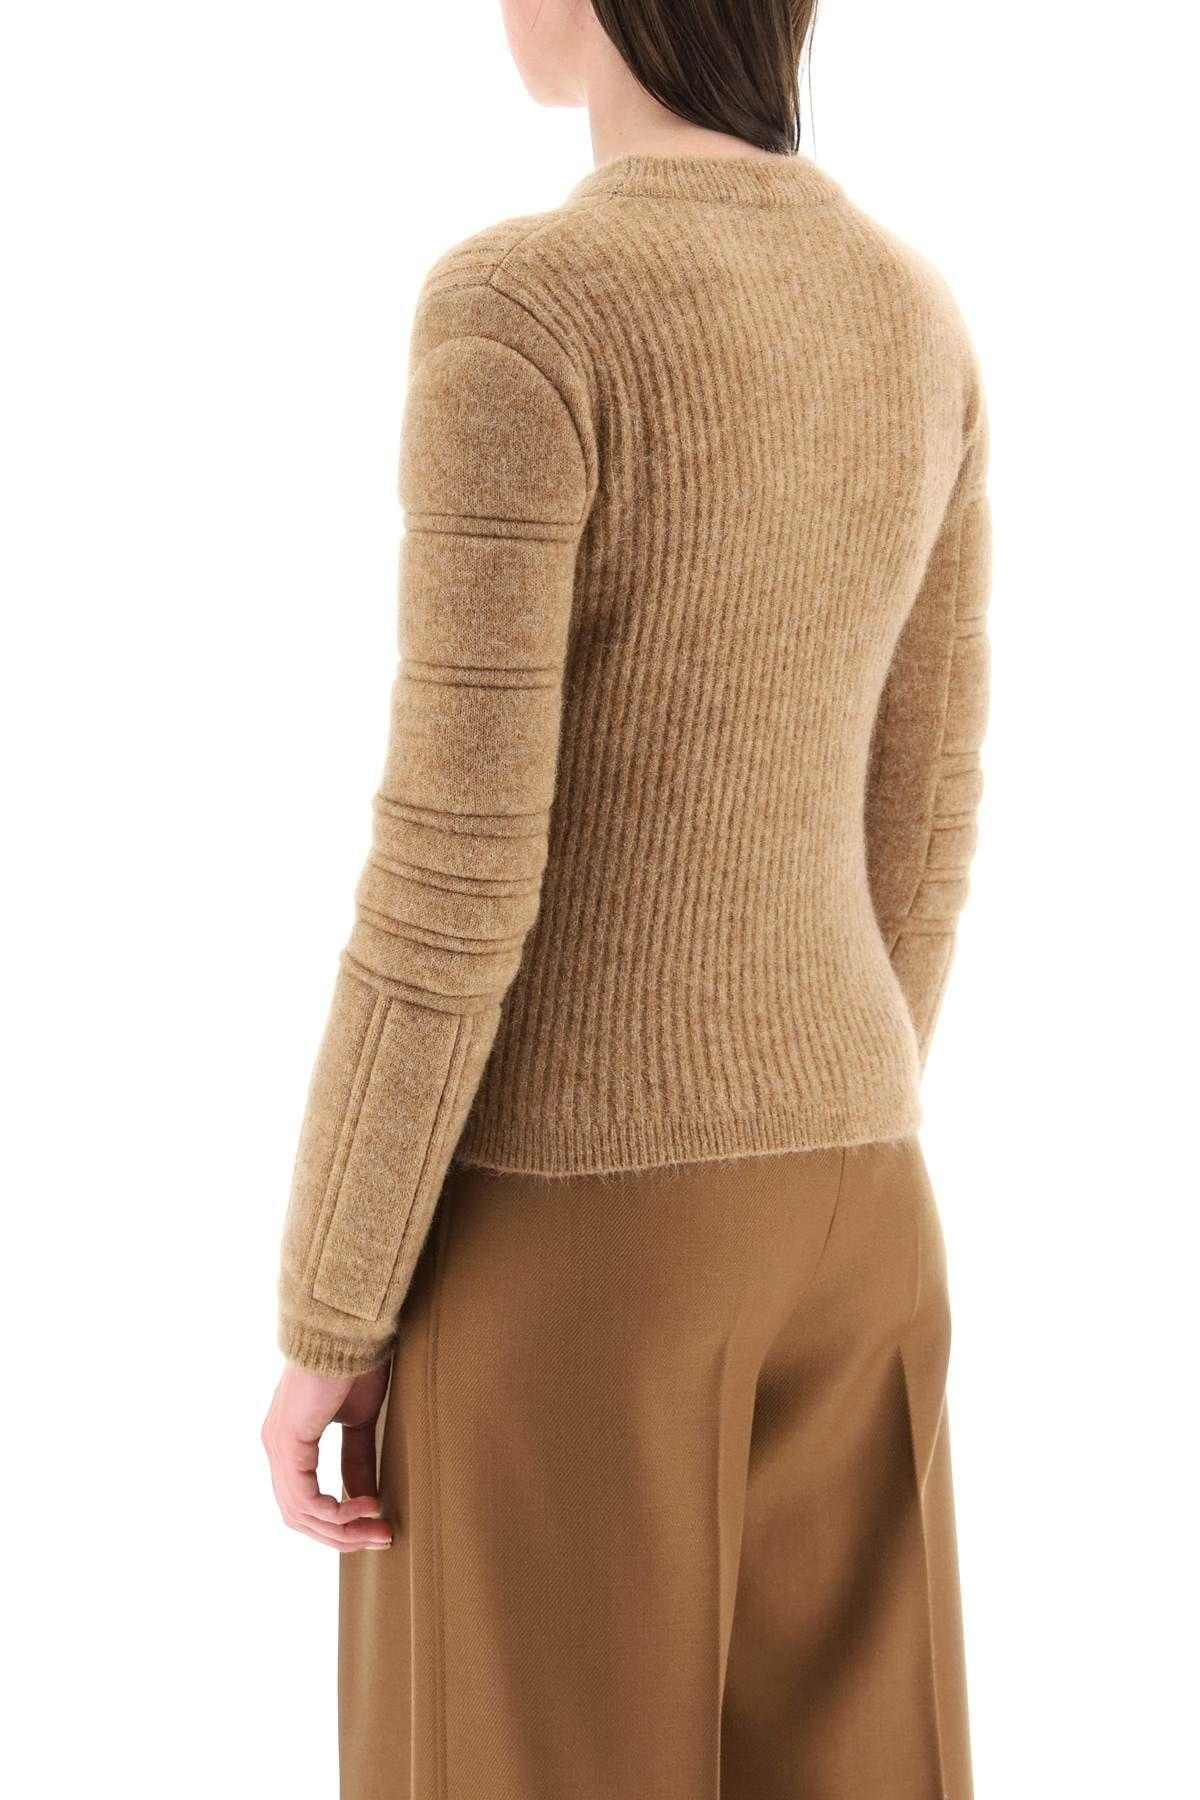 Shop Max Mara Smirne Sweater In Wool And Mohair In Beige